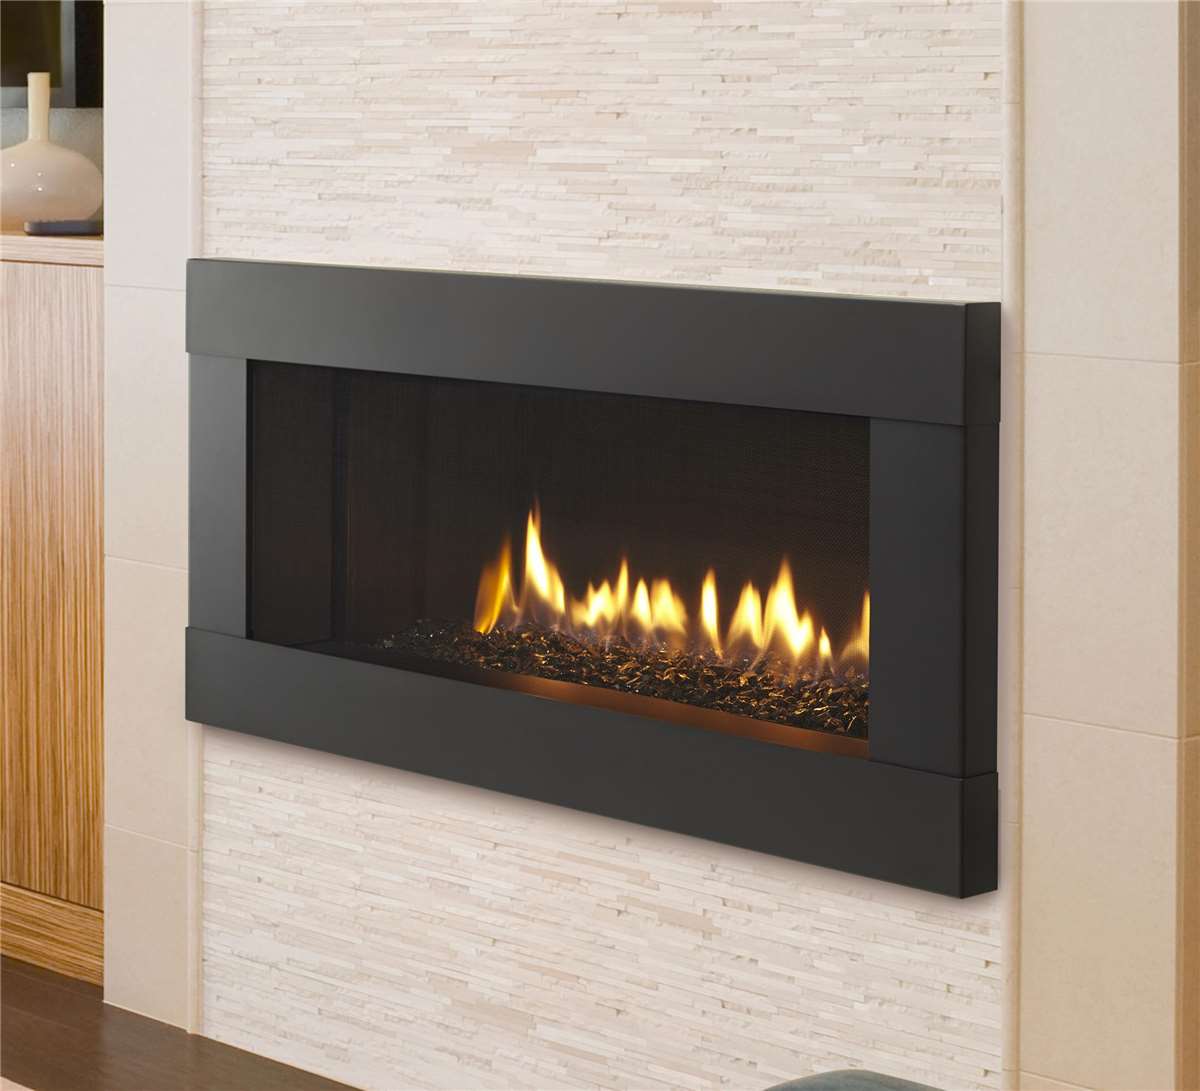 Heatilator Crave 36" gas fireplace with Four Square front and black glass media.